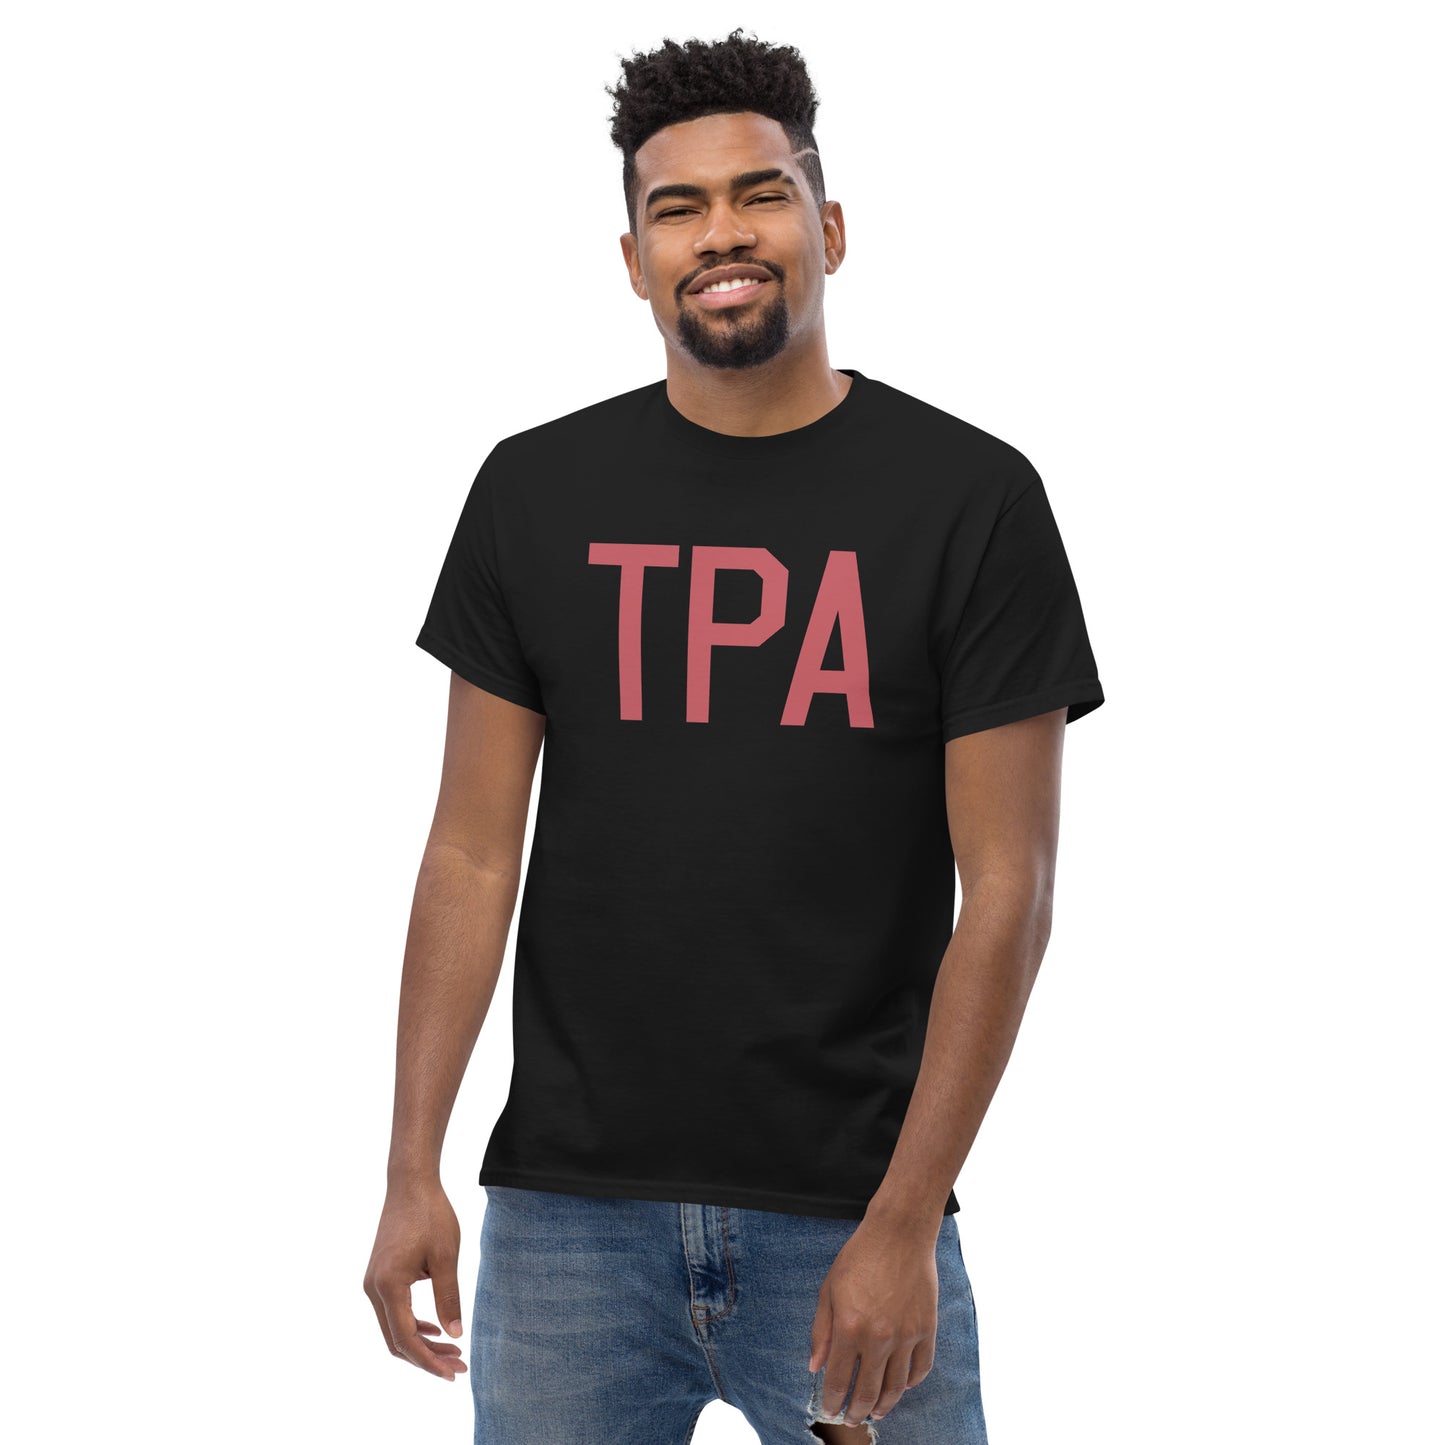 Aviation Enthusiast Men's Tee - Deep Pink Graphic • TPA Tampa • YHM Designs - Image 06